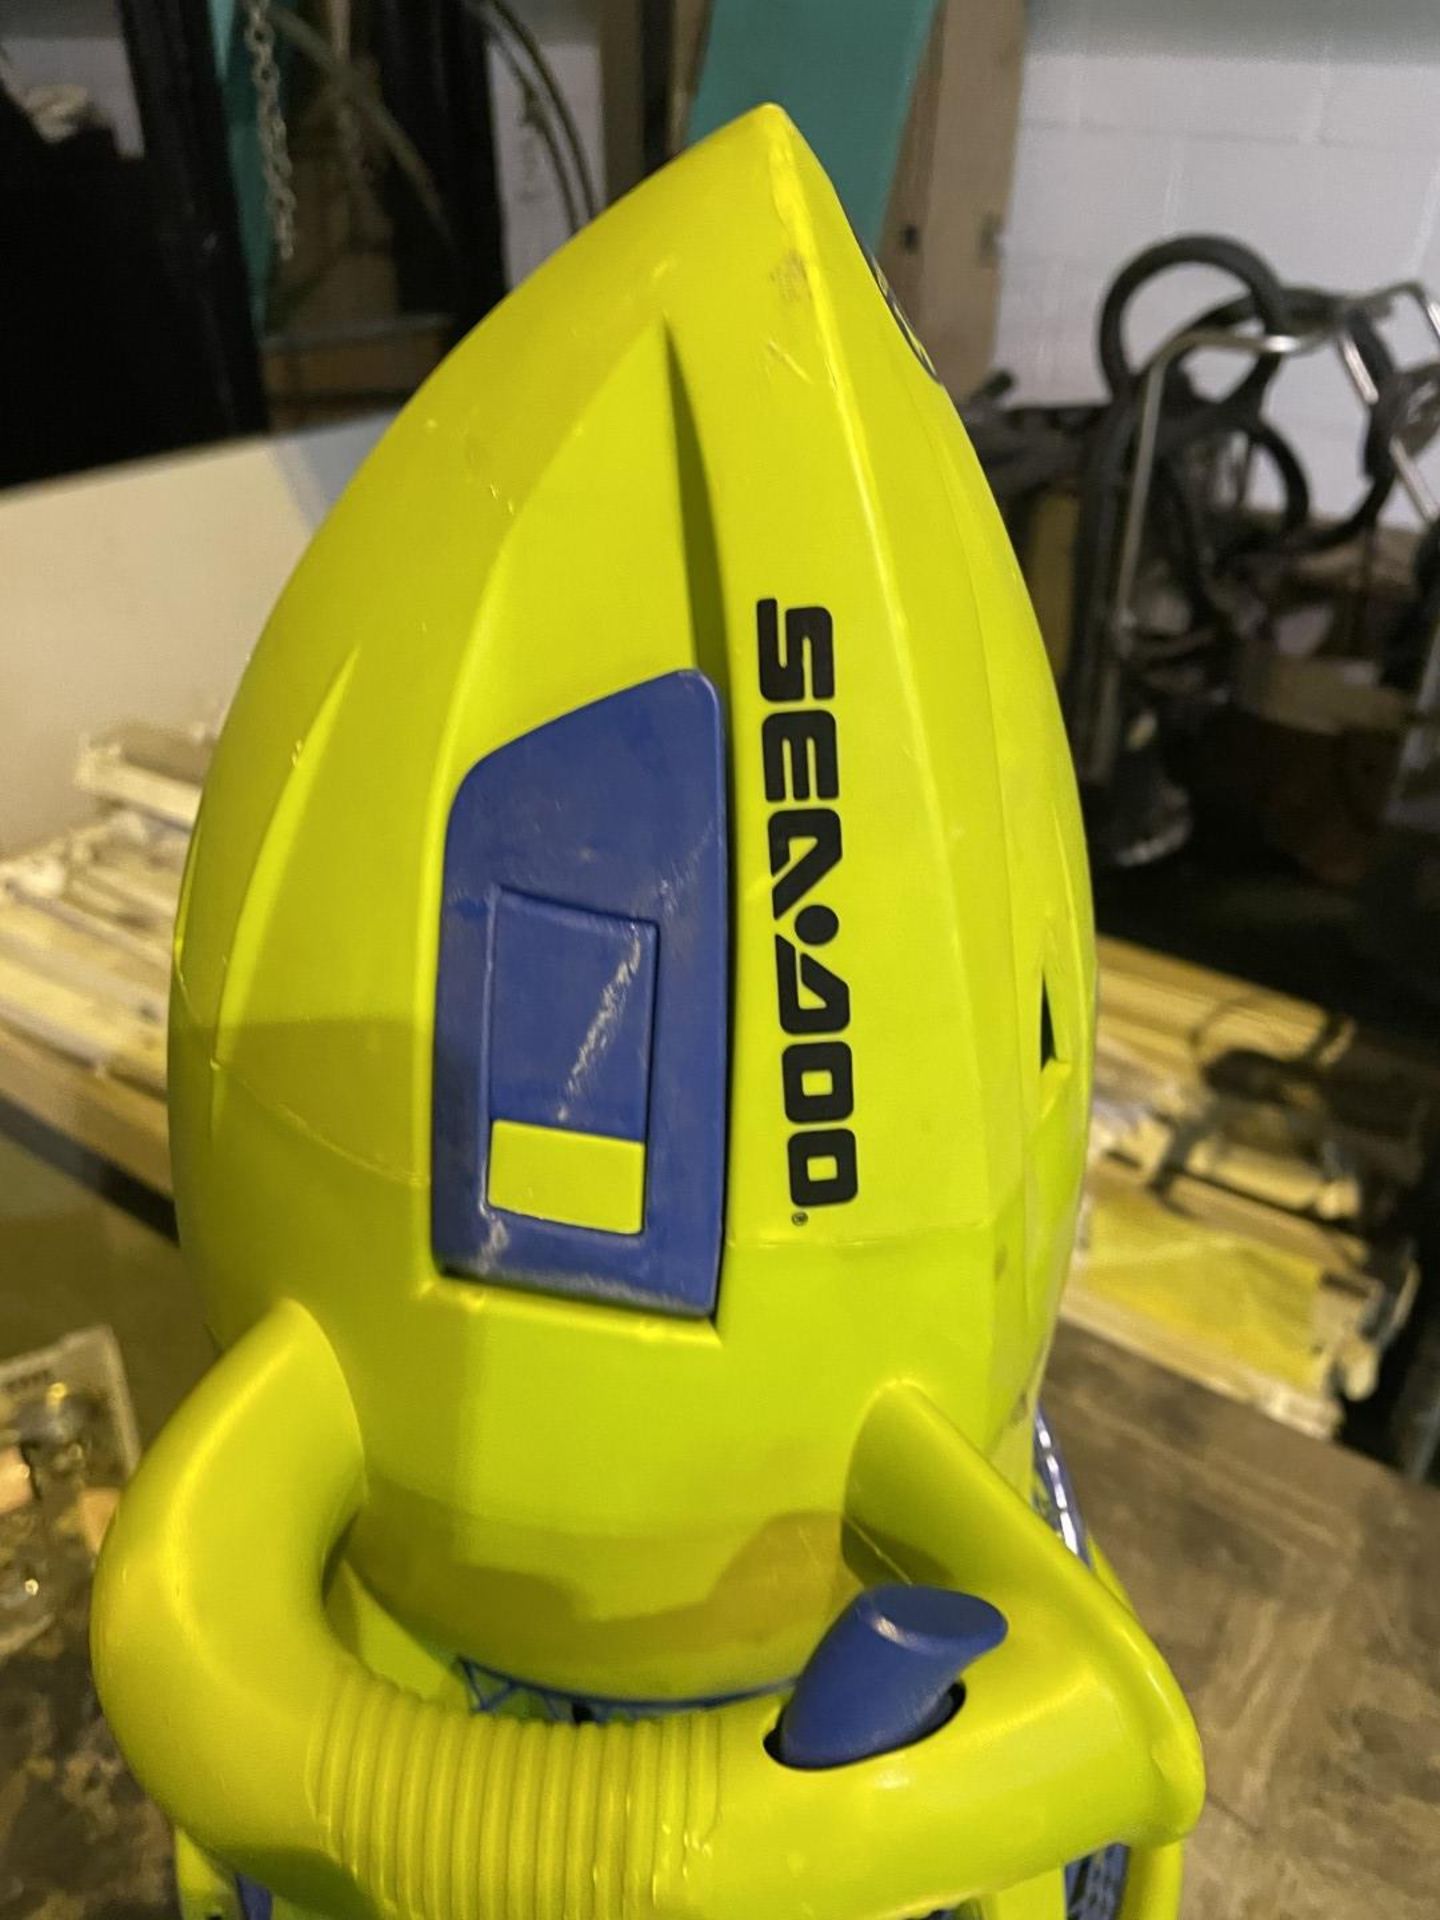 1 x Seadoo Seascooter Aqua Ranger Sd95001 Without Battery Charger - Ref: J141 - CL531 - Essex - Image 7 of 9